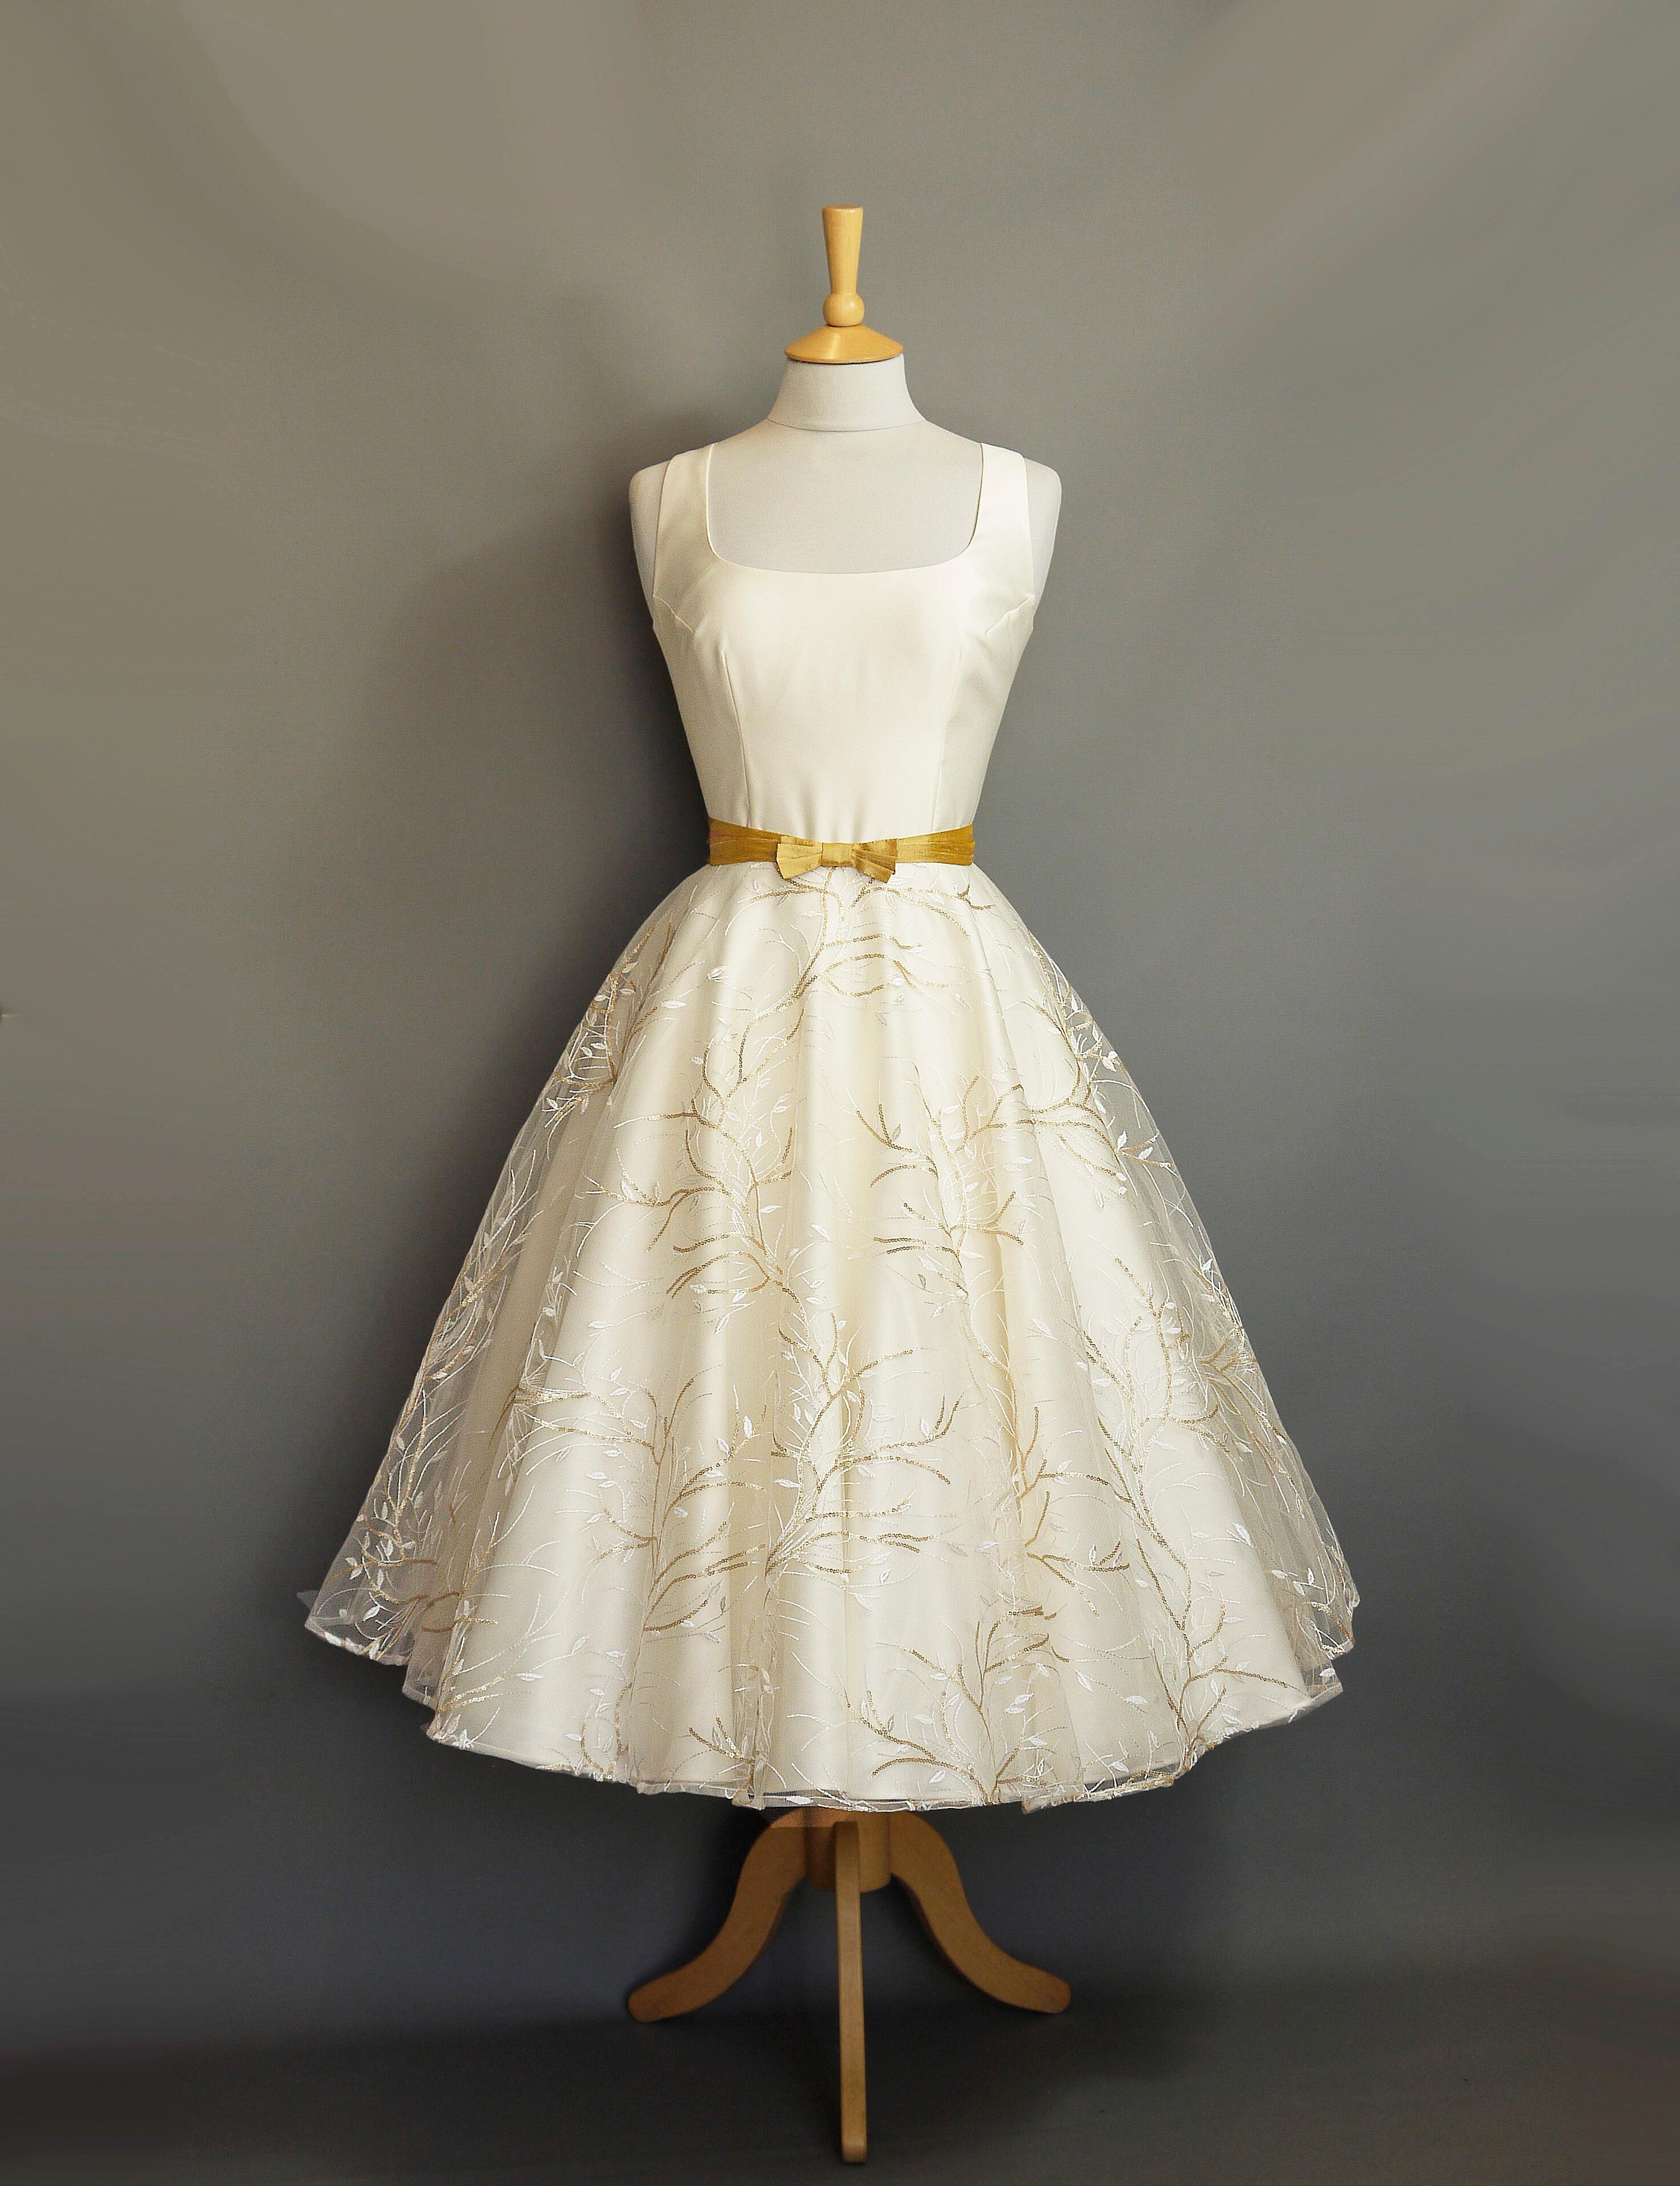 1950s Vintage Inspired Bridal and Occasion Wear